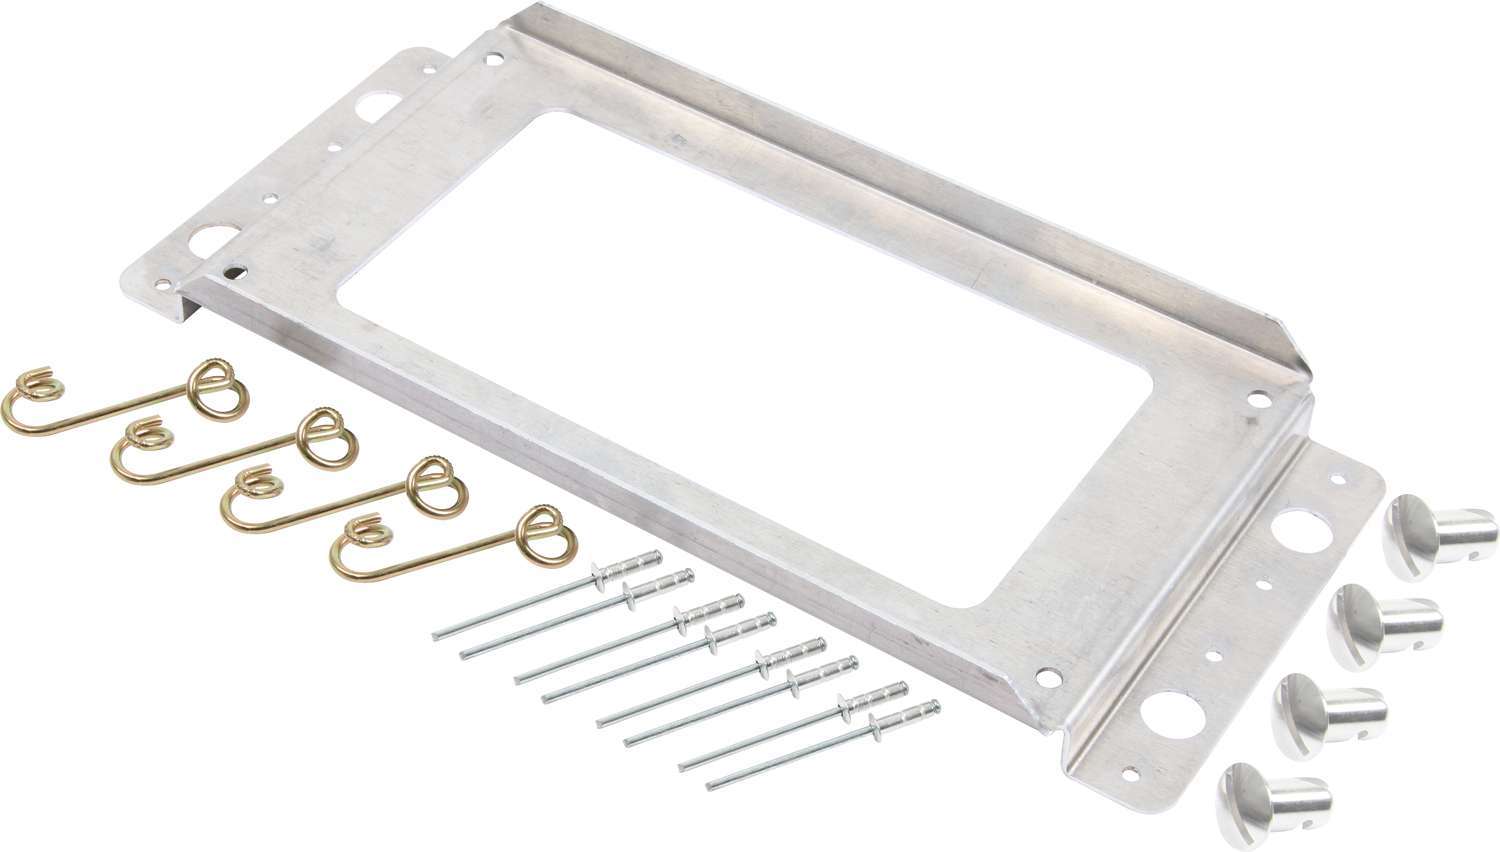 QuickCar 50-442 Ignition Box Bracket, Quick Release, Aluminum, Mounts MSD Ignition Boxes, Kit